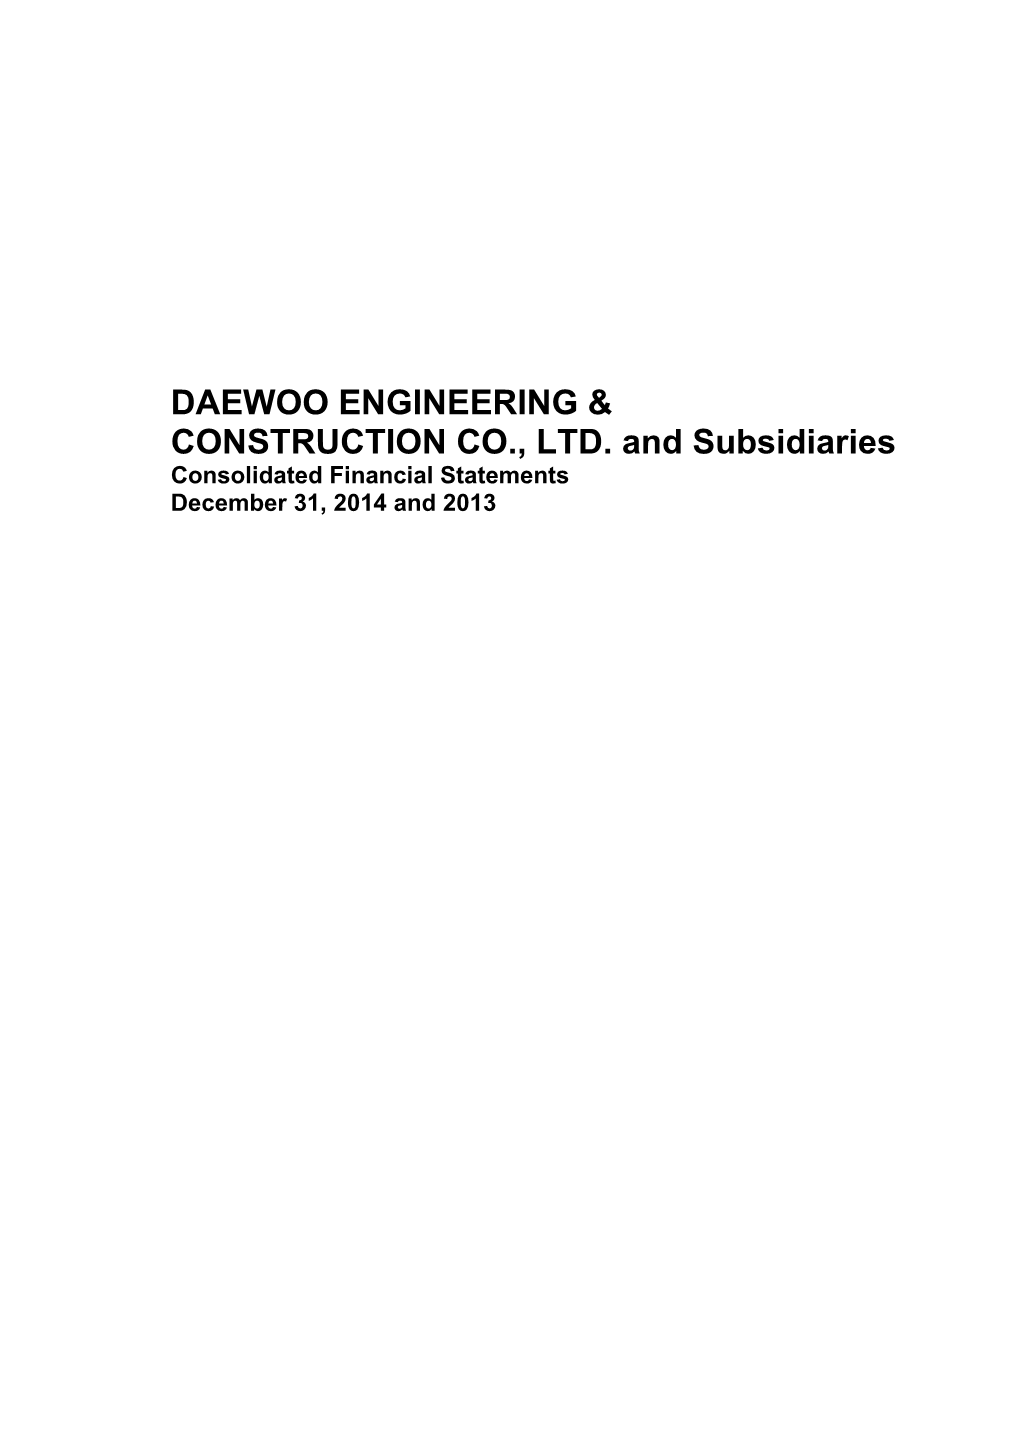 DAEWOO ENGINEERING & CONSTRUCTION CO., LTD. And